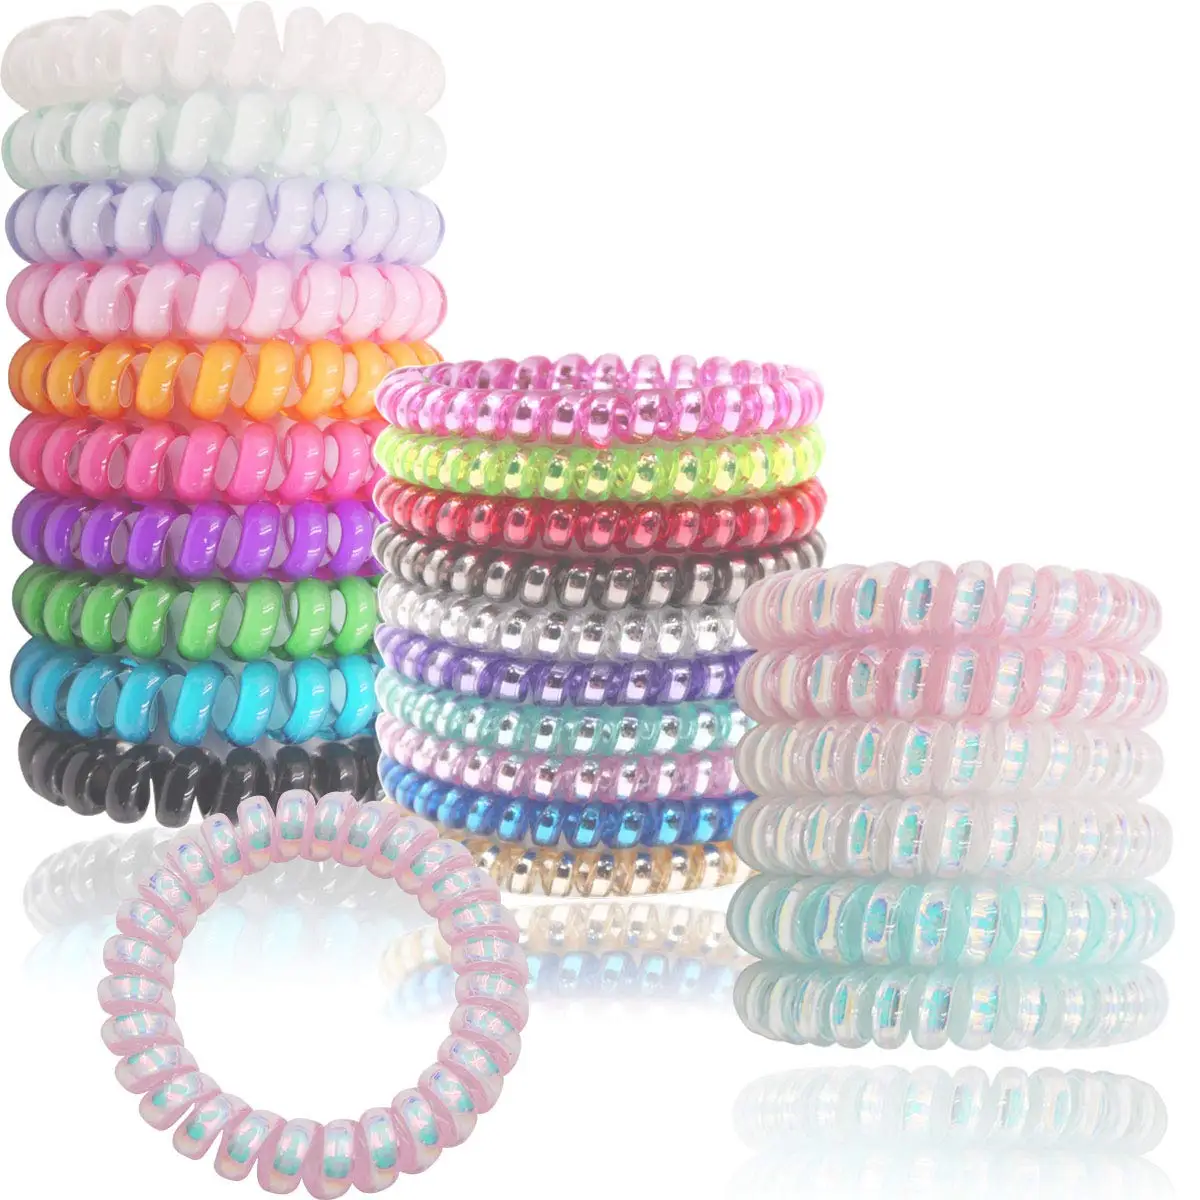 Women Matt Colors Glow in Dark Cloth Telephone Wire Rubber Bands Stretchy Colors Non-mark Spiral Coil Ropes Solid Hair Ties images - 6